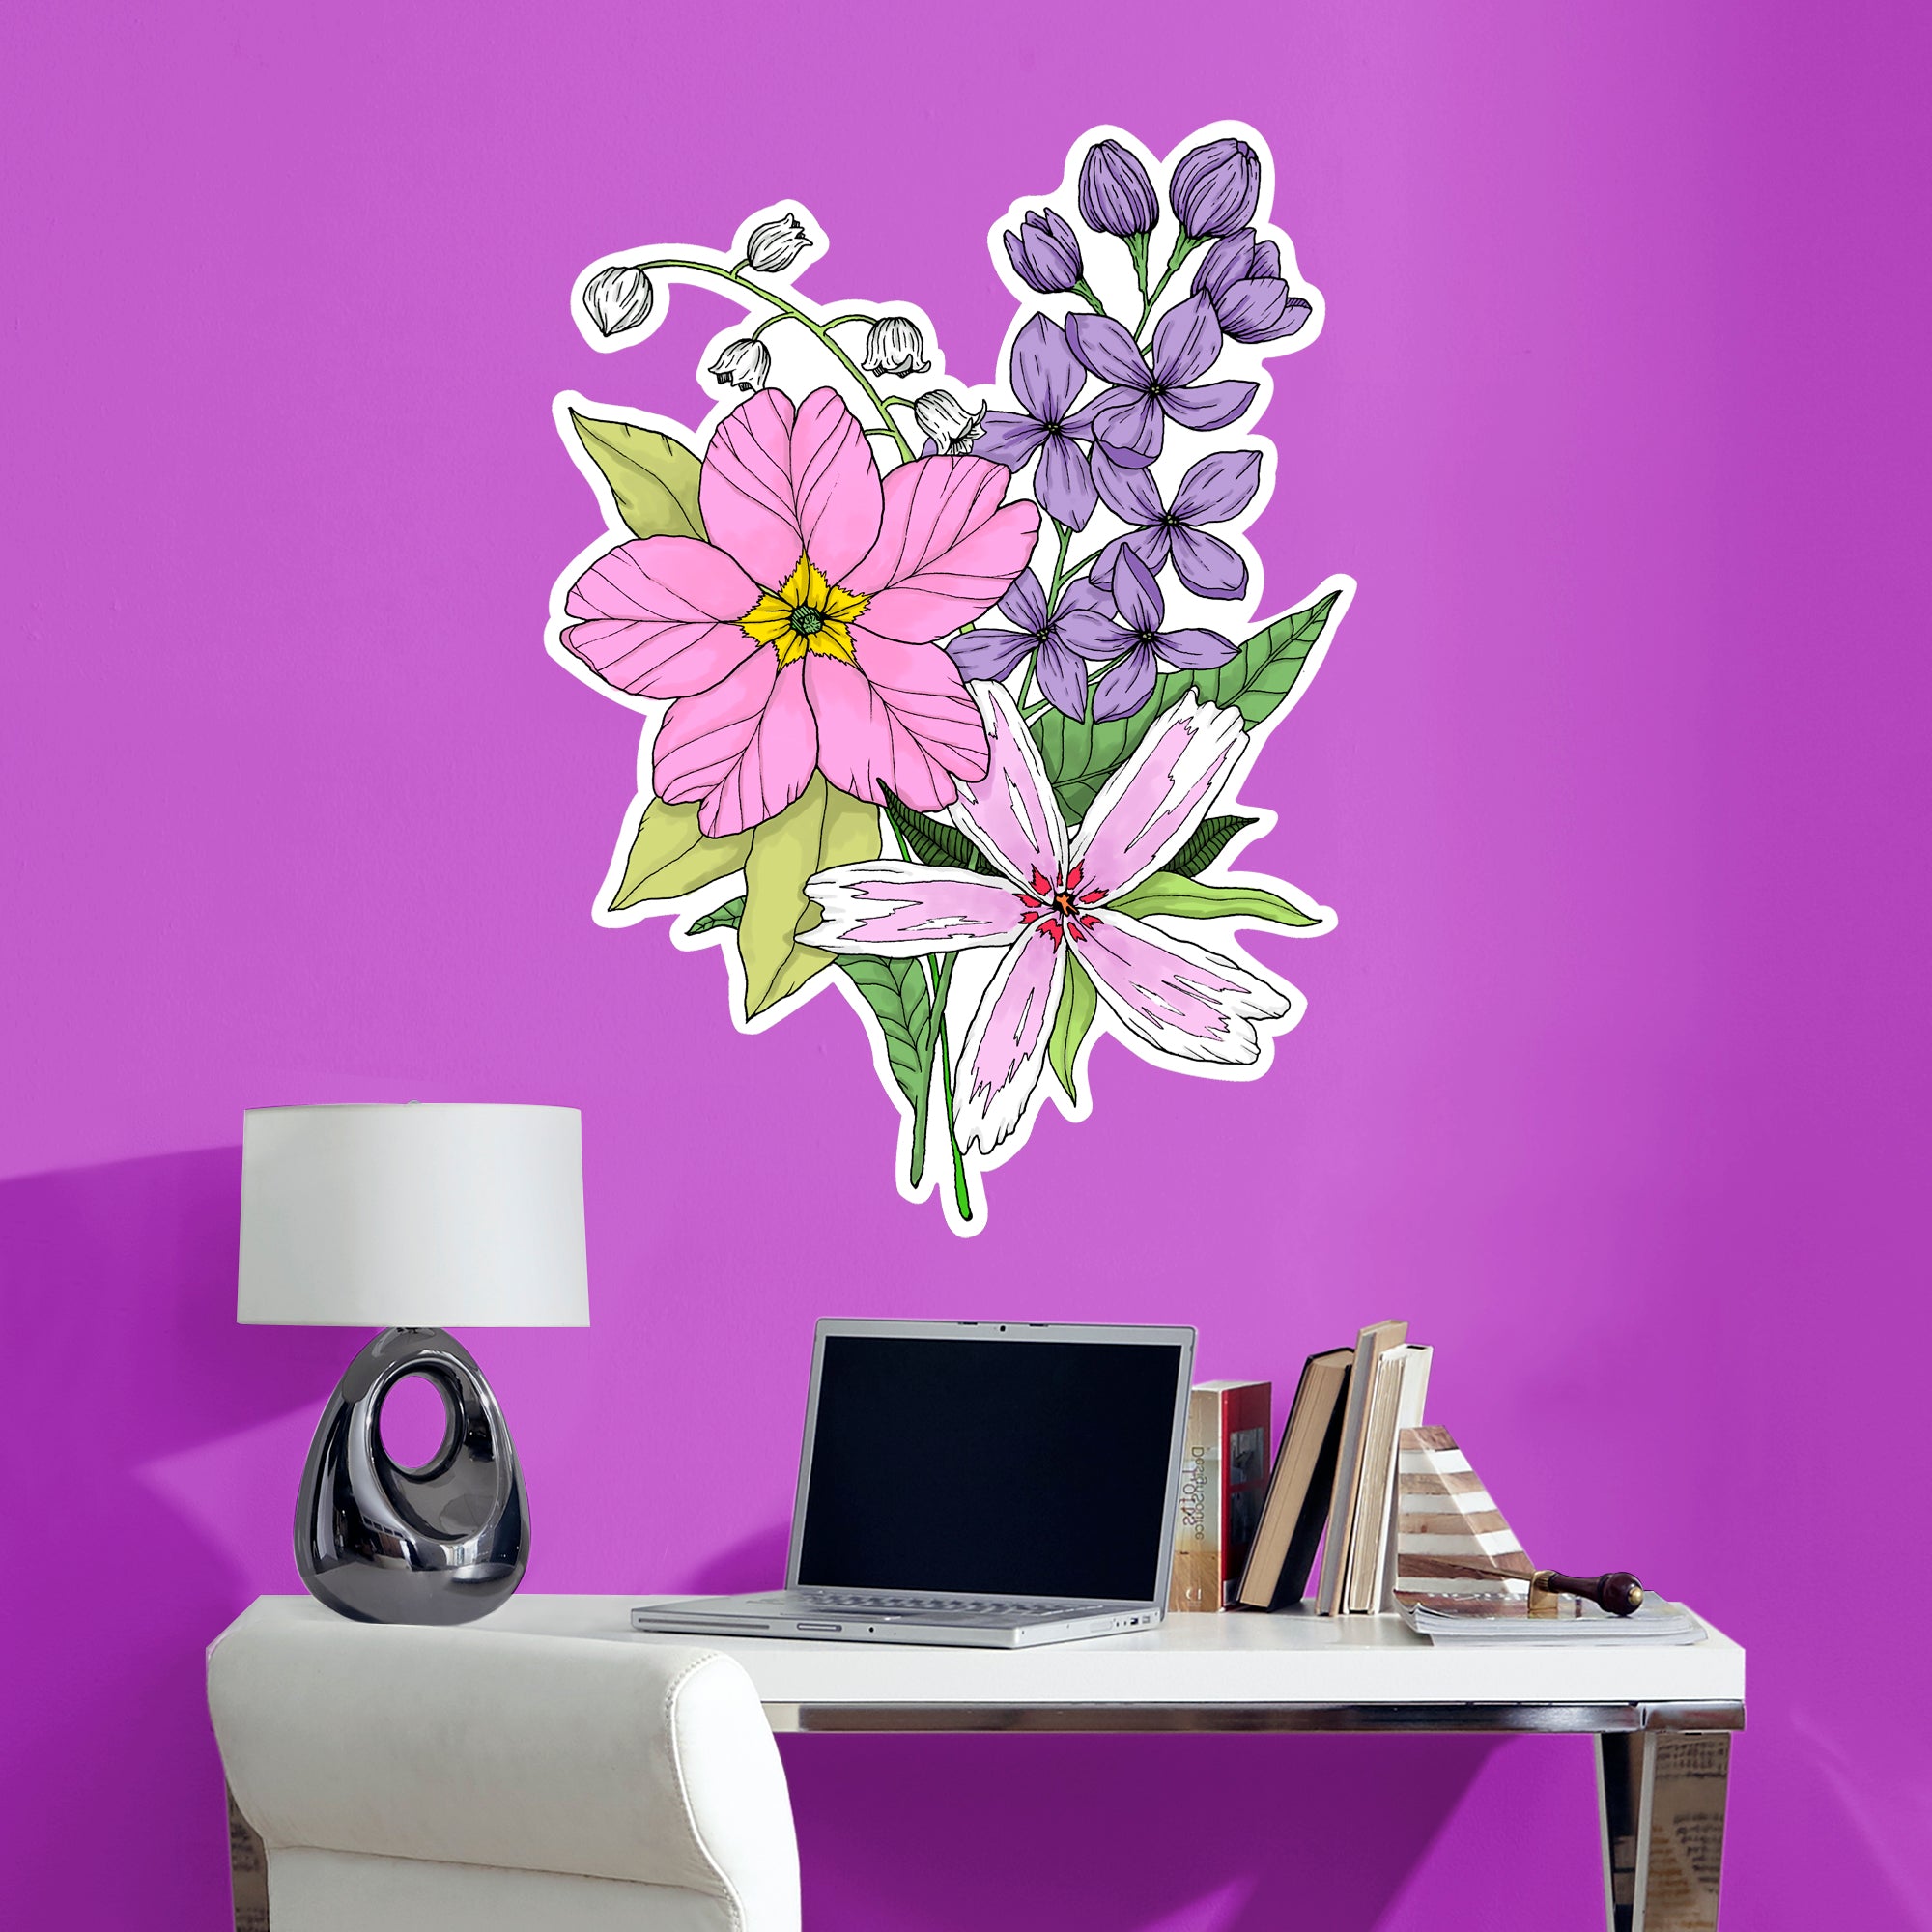 Flowers 2 - Officially Licensed Big Moods Removable Wall Decal Giant Decal (50"W x 36"H) by Fathead | Vinyl